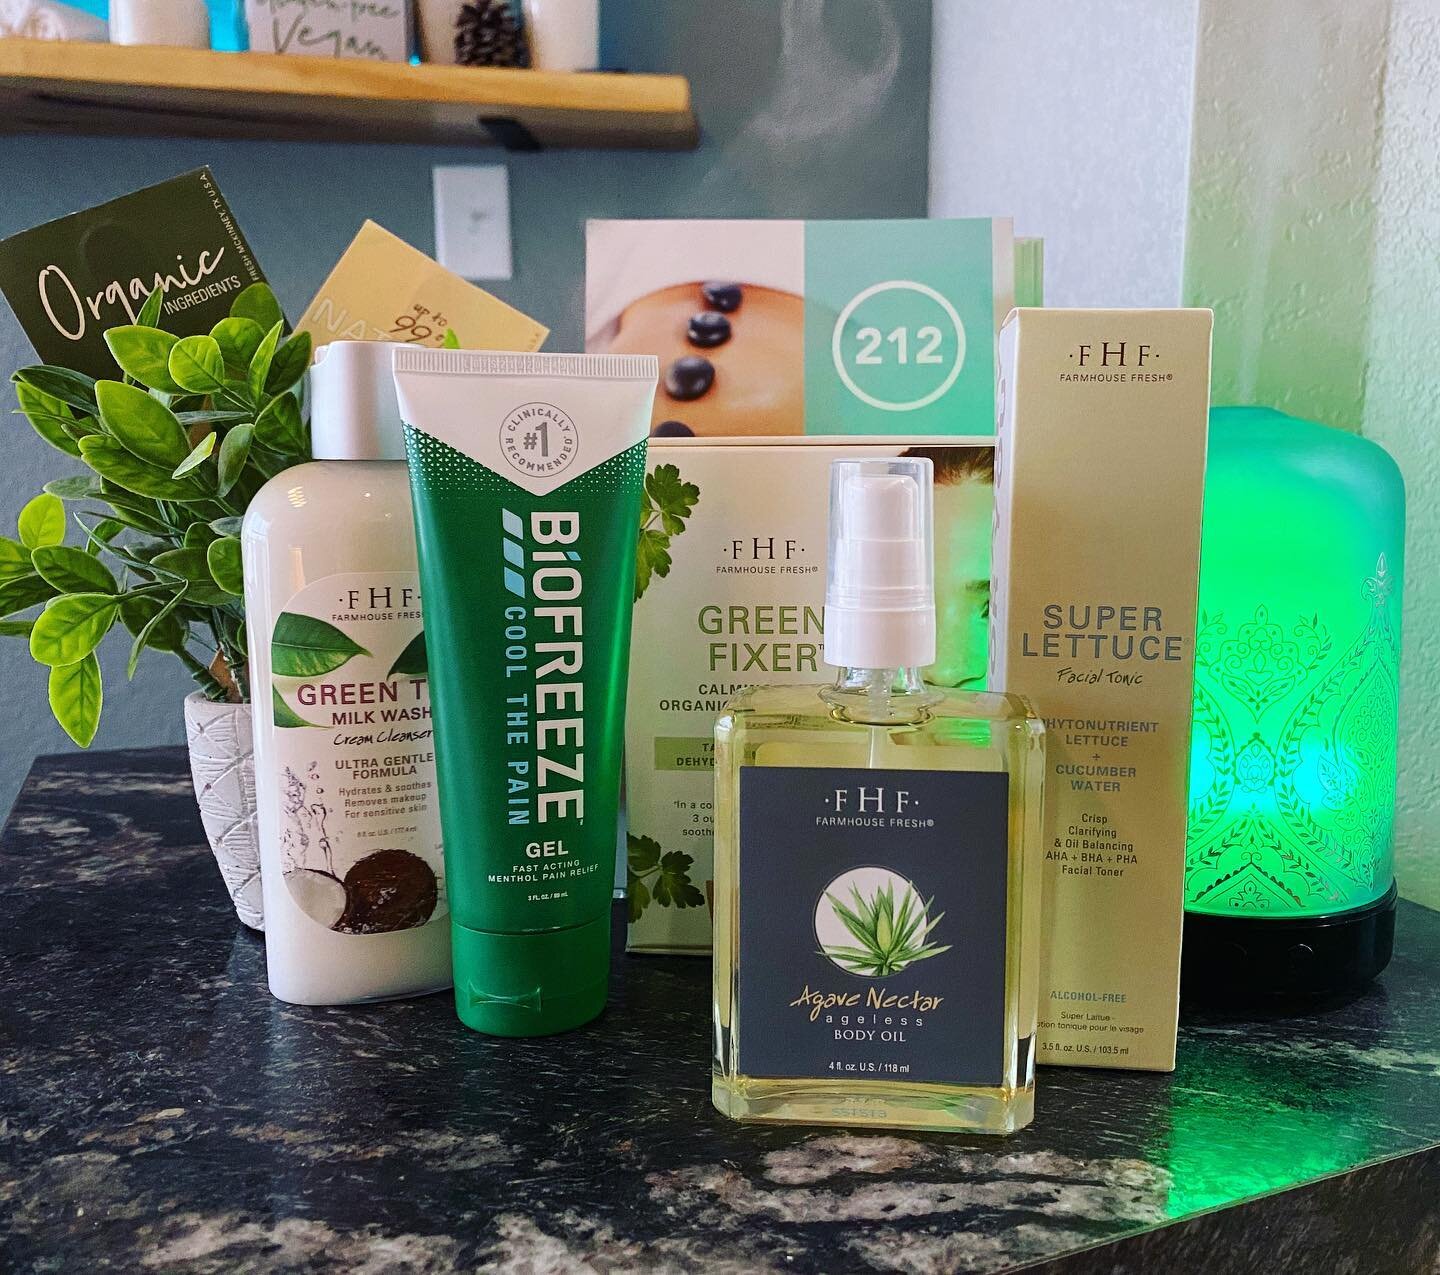 We&rsquo;ve got ALL the green products for you this St. Patricks Day!☘️